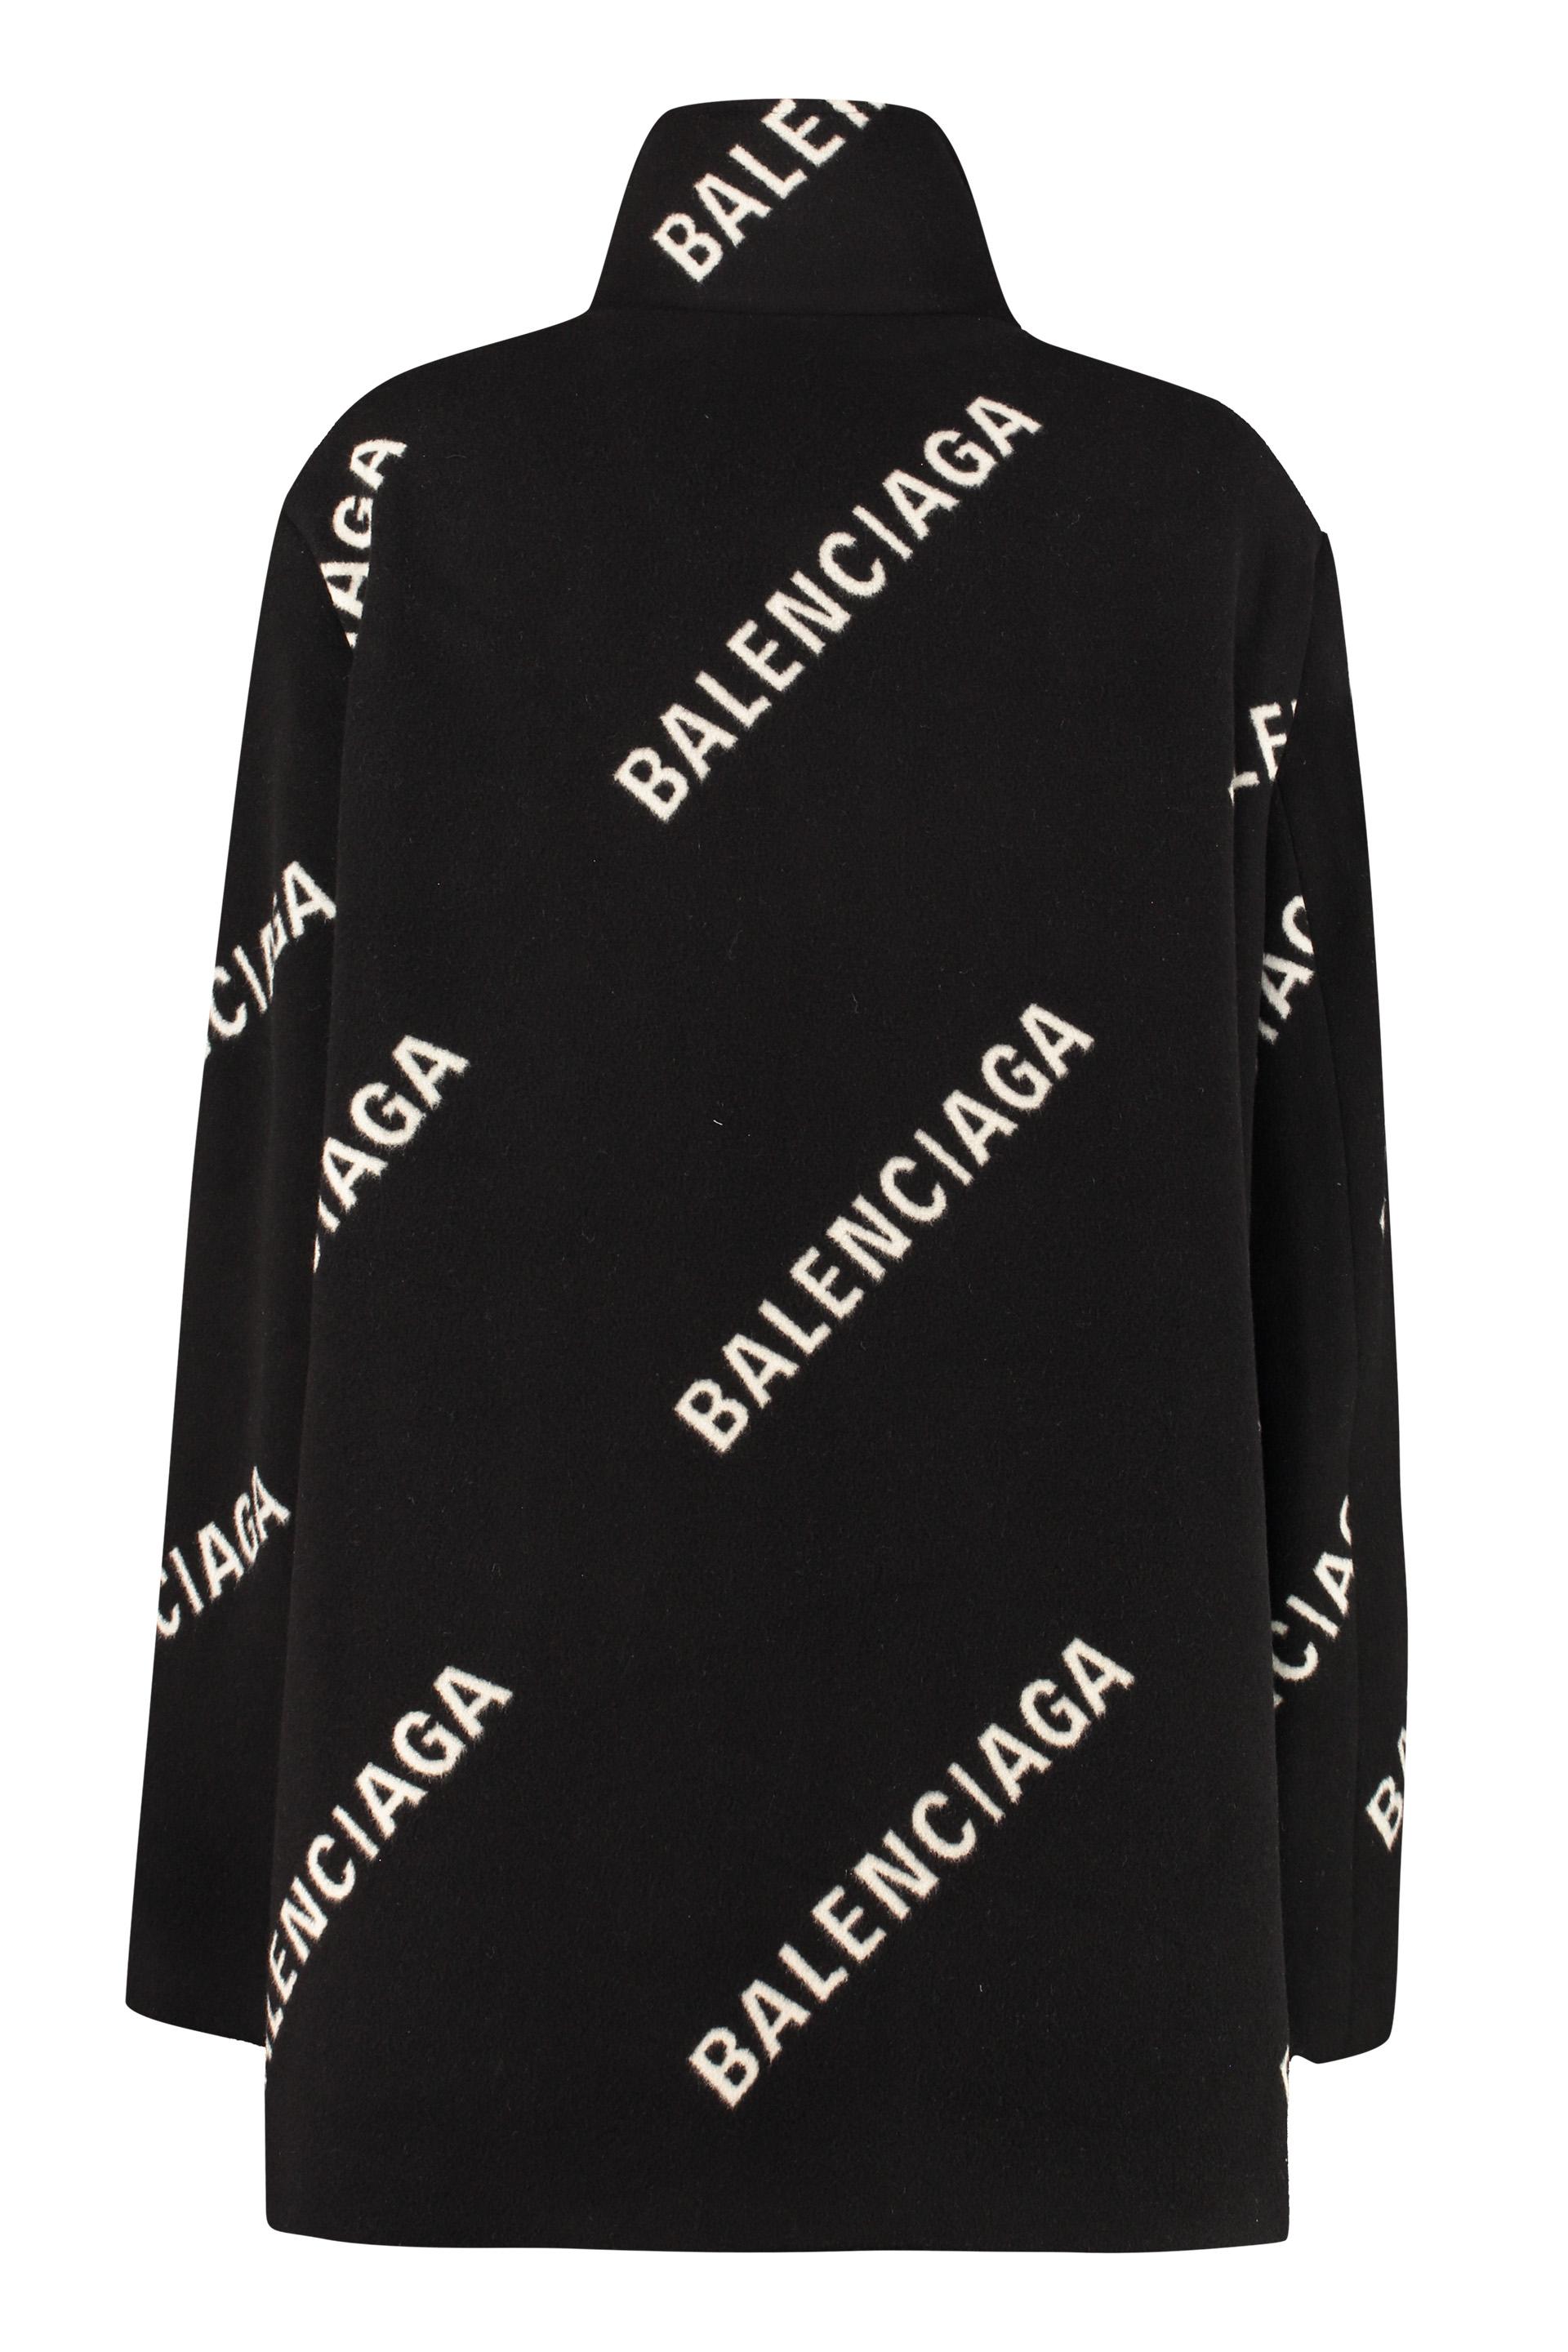 Balenciaga Wool And Cashmere Coat in Black - Lyst